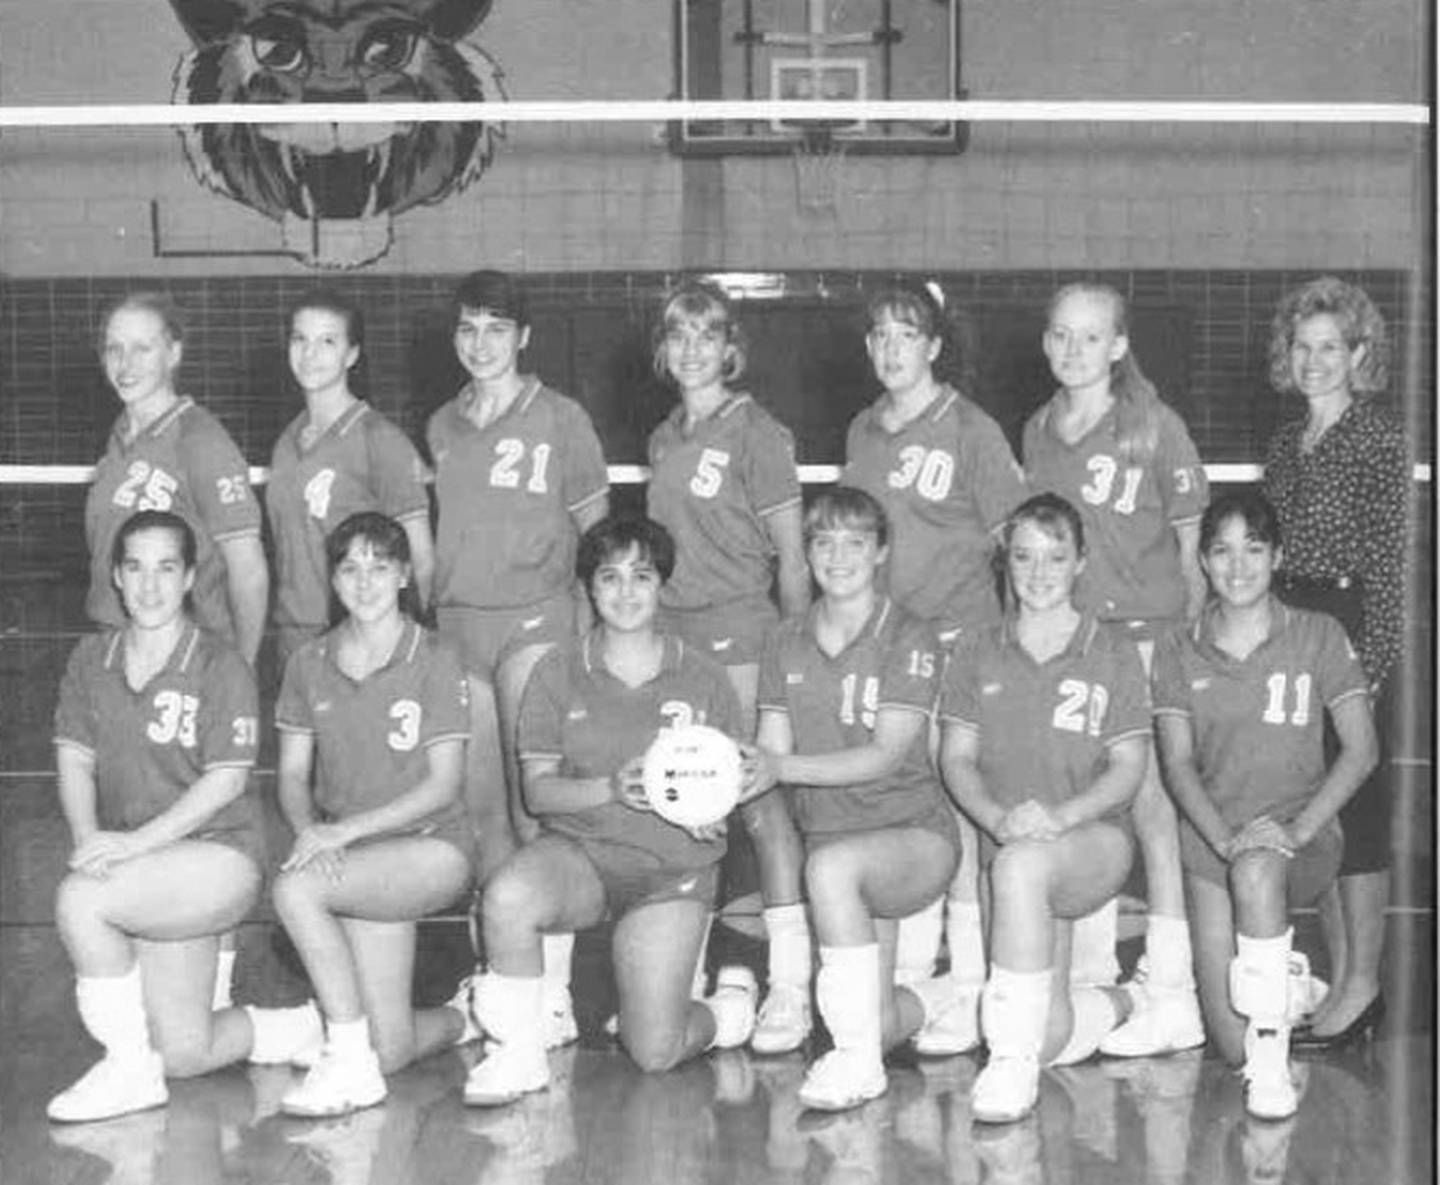 The 1994 Princeton volleyball team became the third team to advance to the state tournament. Team members were (front row, from left) Kayley Towns, Heidi Fossum, Gina Dipietro, Sara Kiser, Megan Laine and Michelle Nelson; and (back row) Courtney Sapp, Courtney Kieschnick, Janda Forristall, Kendra Schoff, Kim Sluis, Heather Neff and coach Rita Placek.